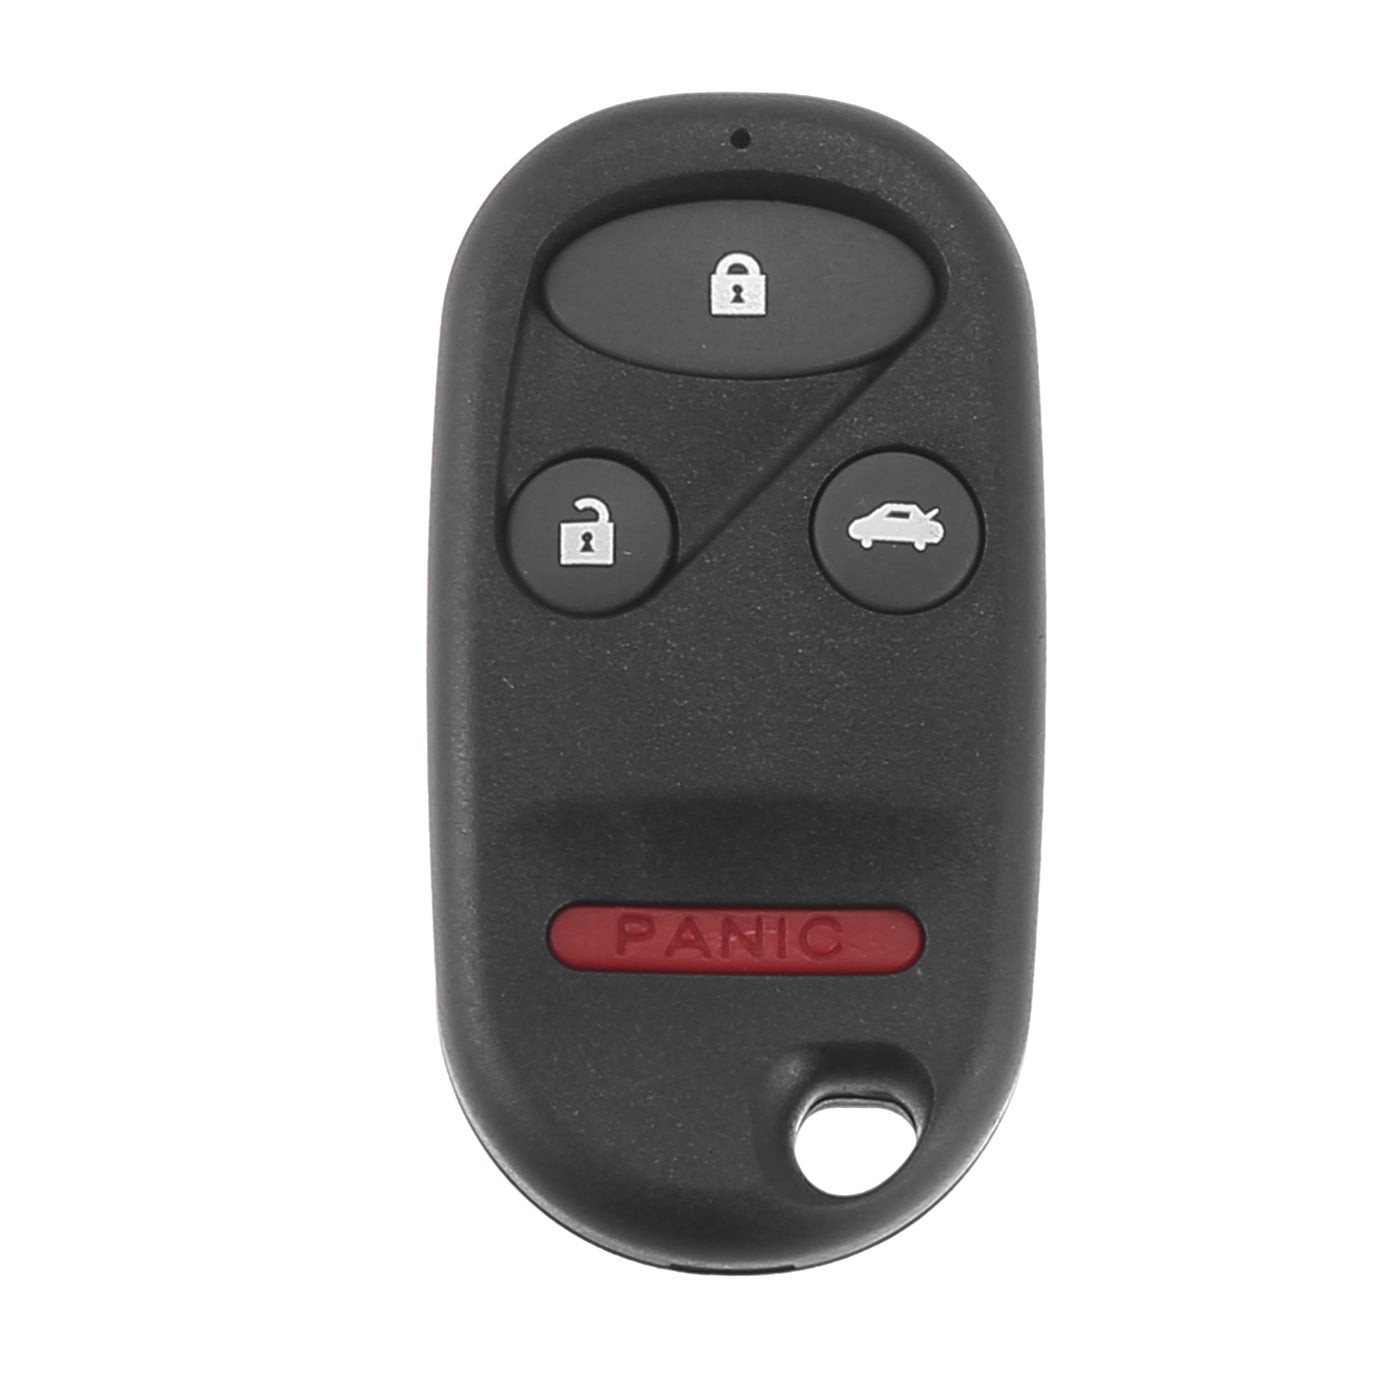 X AUTOHAUX 434MHz A269ZUA101 Replacement Smart Proximity Keyless Entry Remote Key Fob for Honda Accord 1994-1997 for Civic 1996-2000 for Prelude 1996-2002 4 Buttons 39950-S01A01